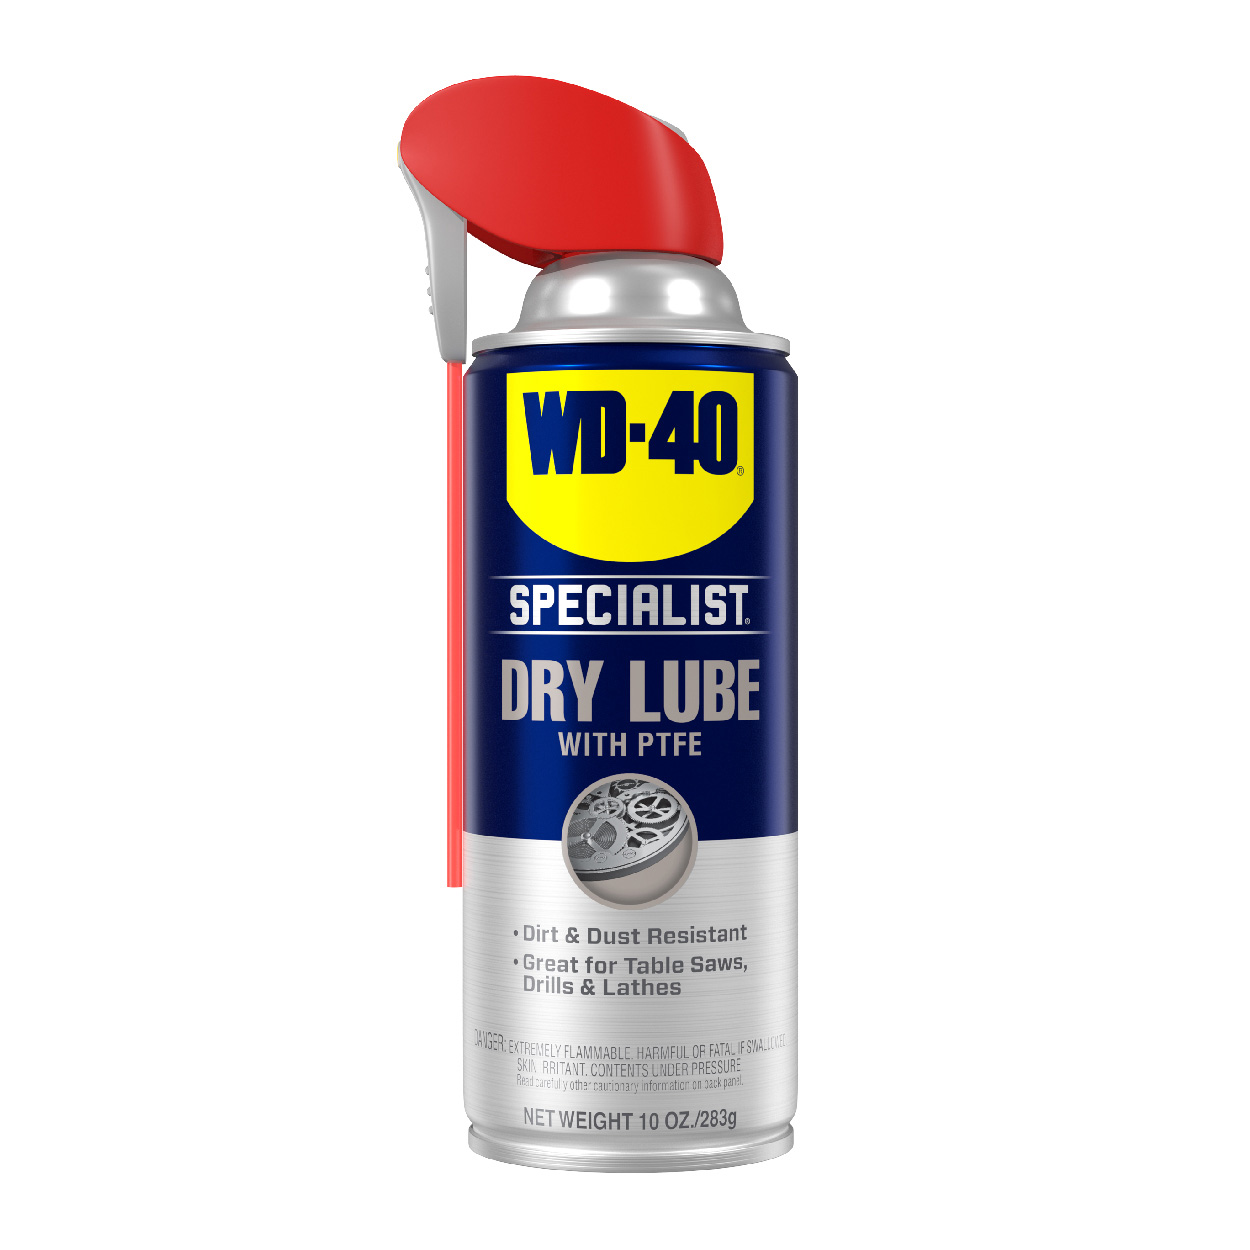 WD-40 Specialist Dry Lube with PTFE, Lubricant with Smart Straw Spray, 10 oz - image 1 of 9